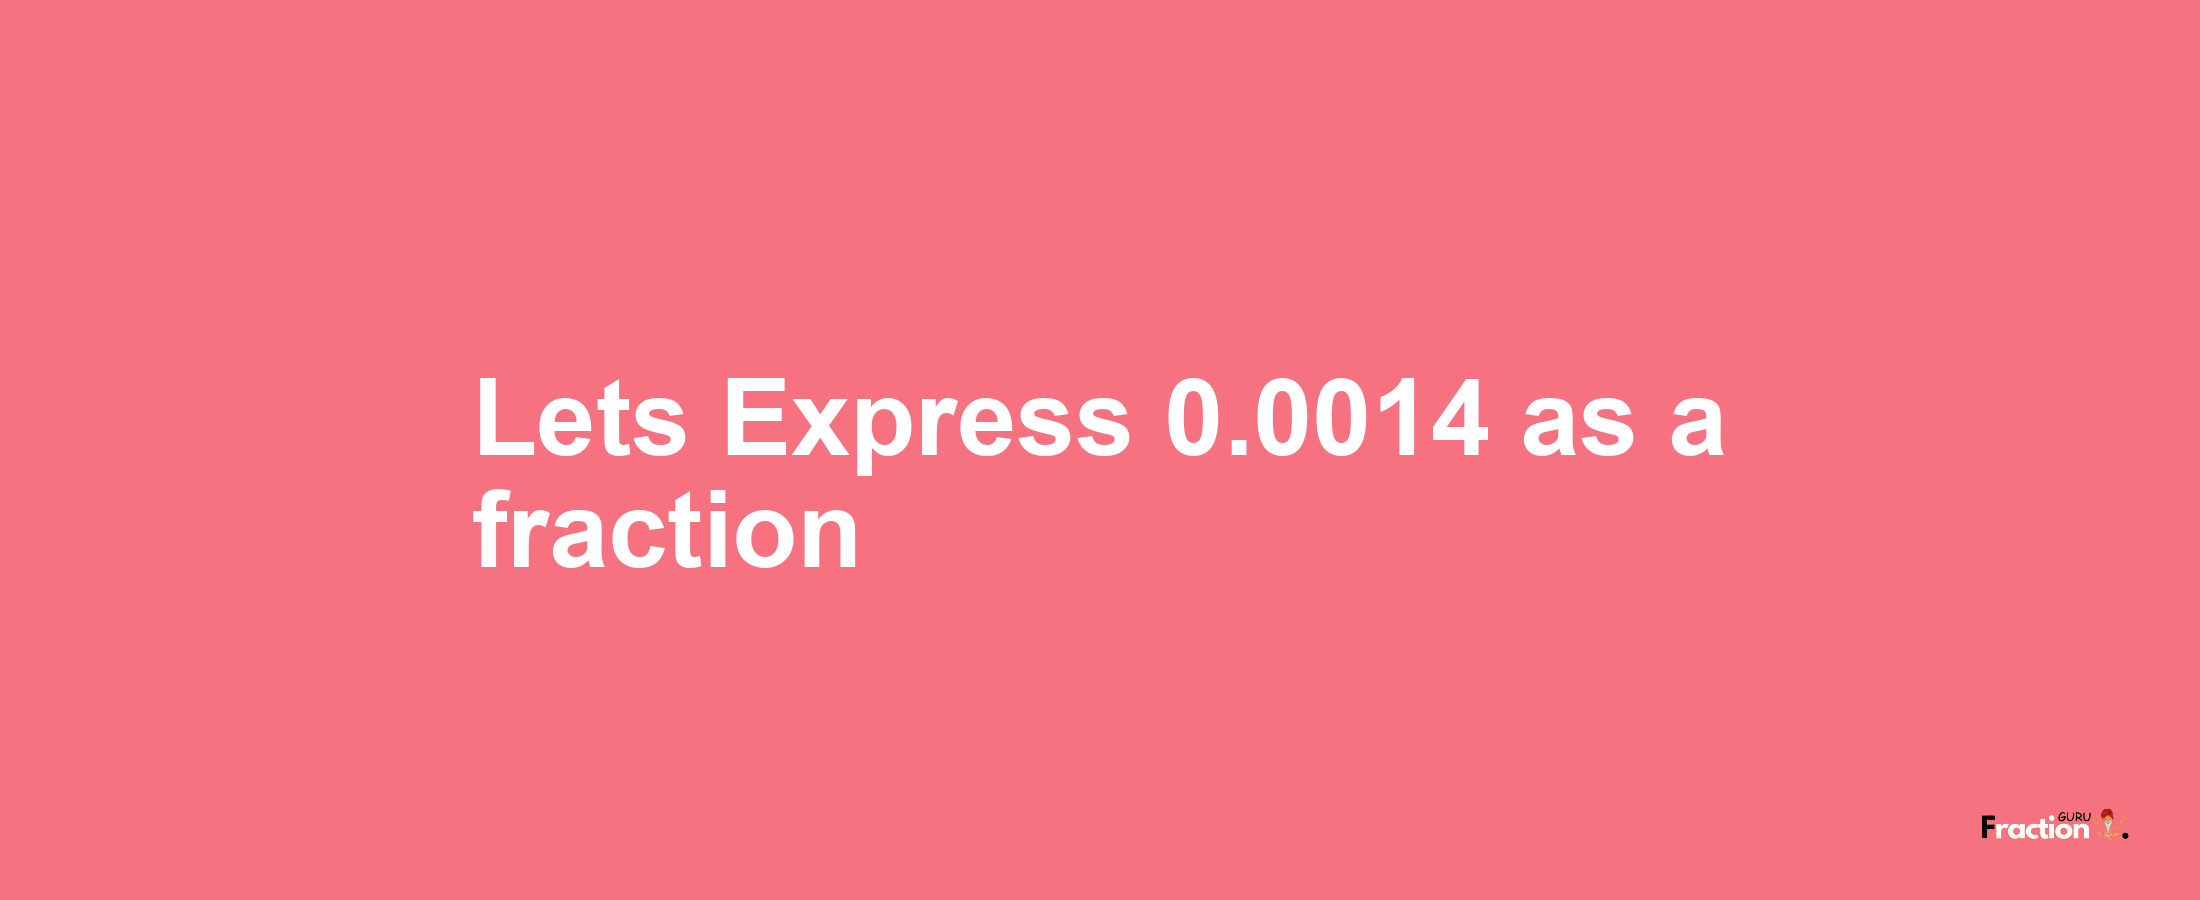 Lets Express 0.0014 as afraction